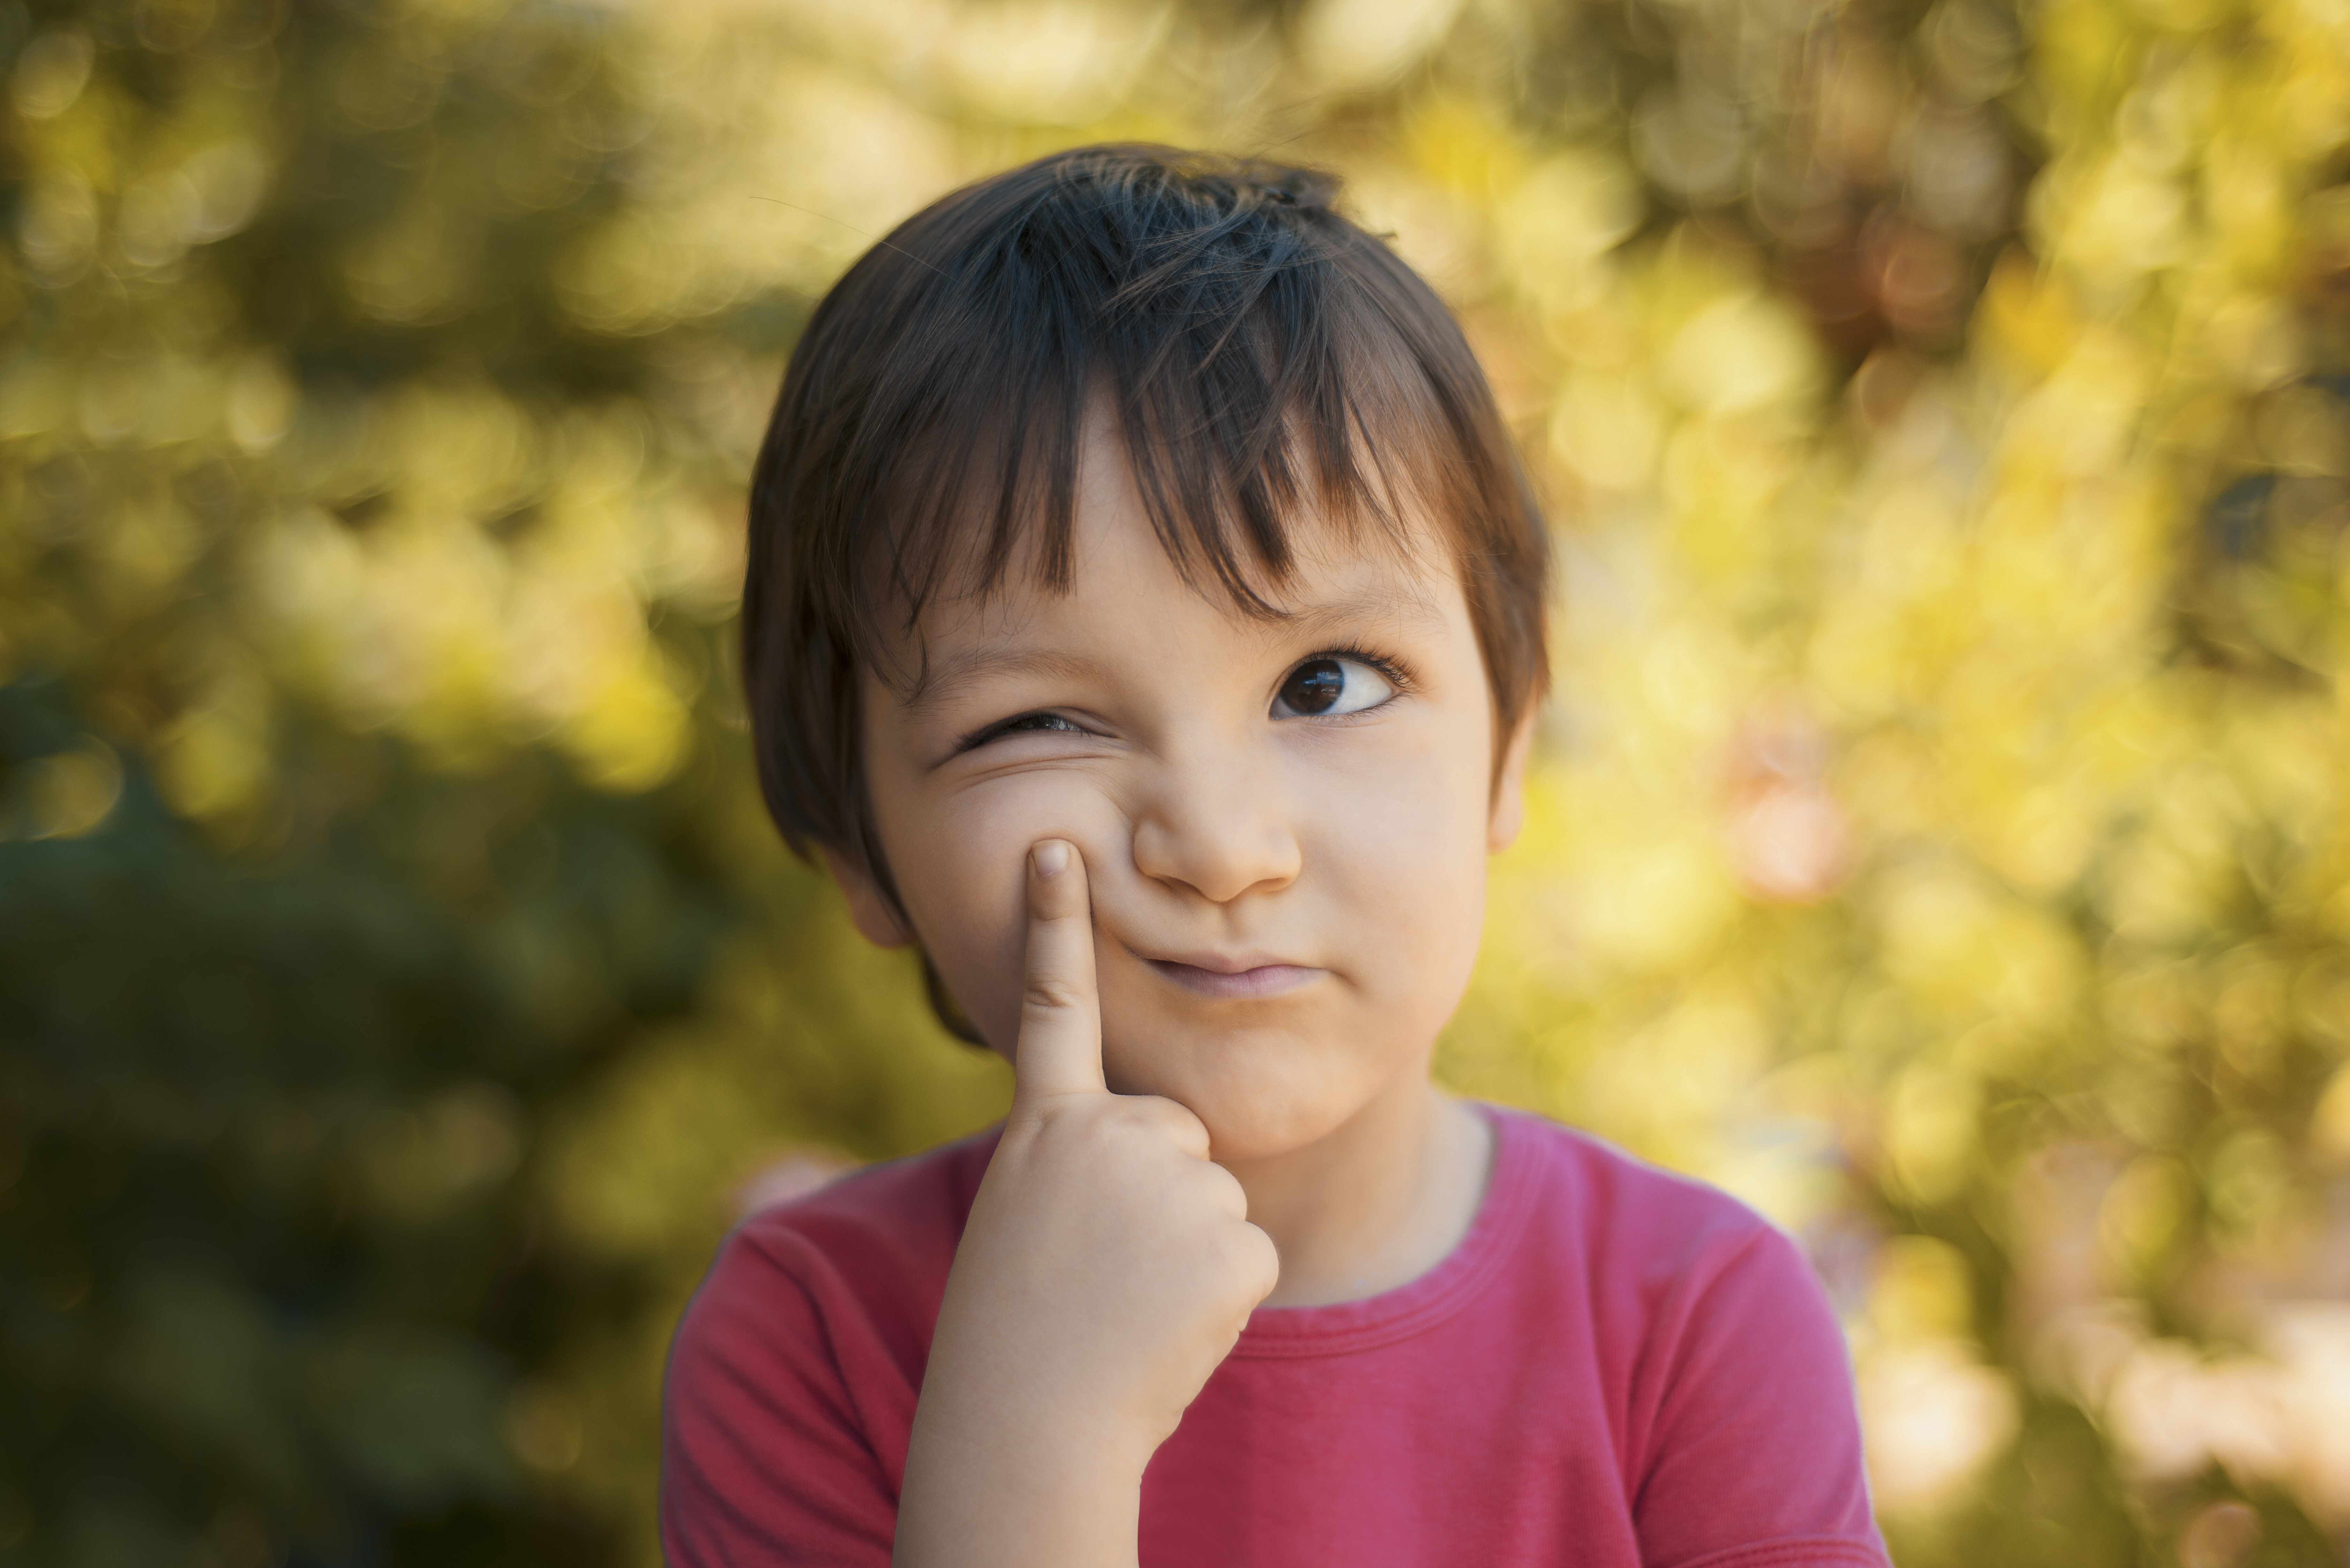 A young child wearing a simple shirt stands outdoors, looking thoughtful and playfully pressing one finger to their cheek. The background is blurred foliage